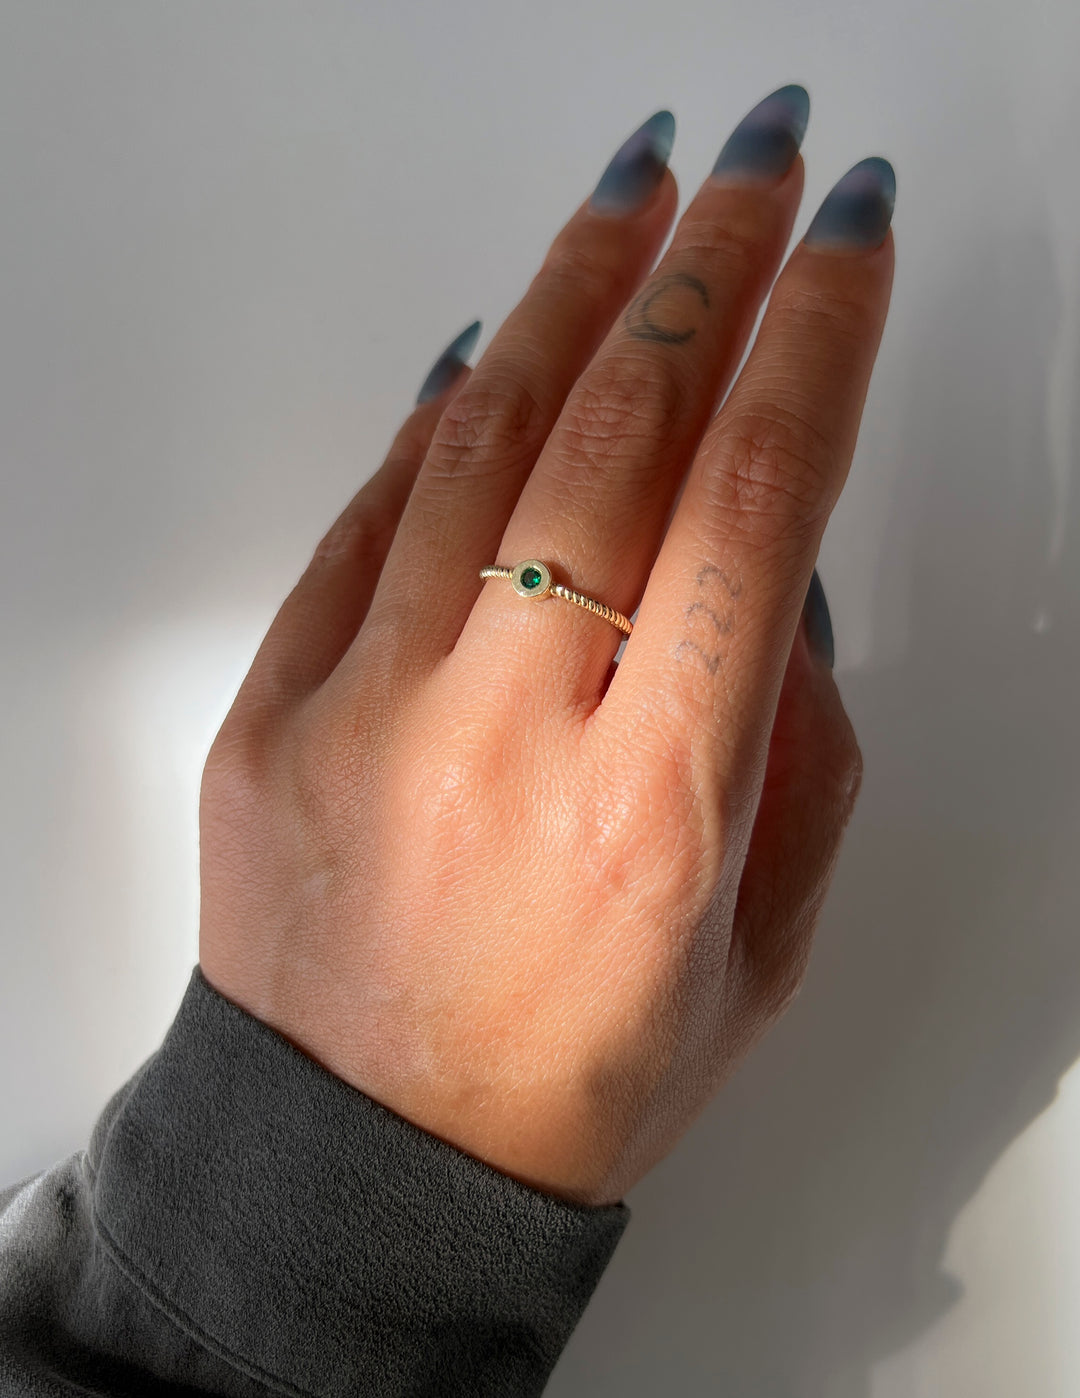 10k solid yellow Gold Rope Green CZ Stacker Ring